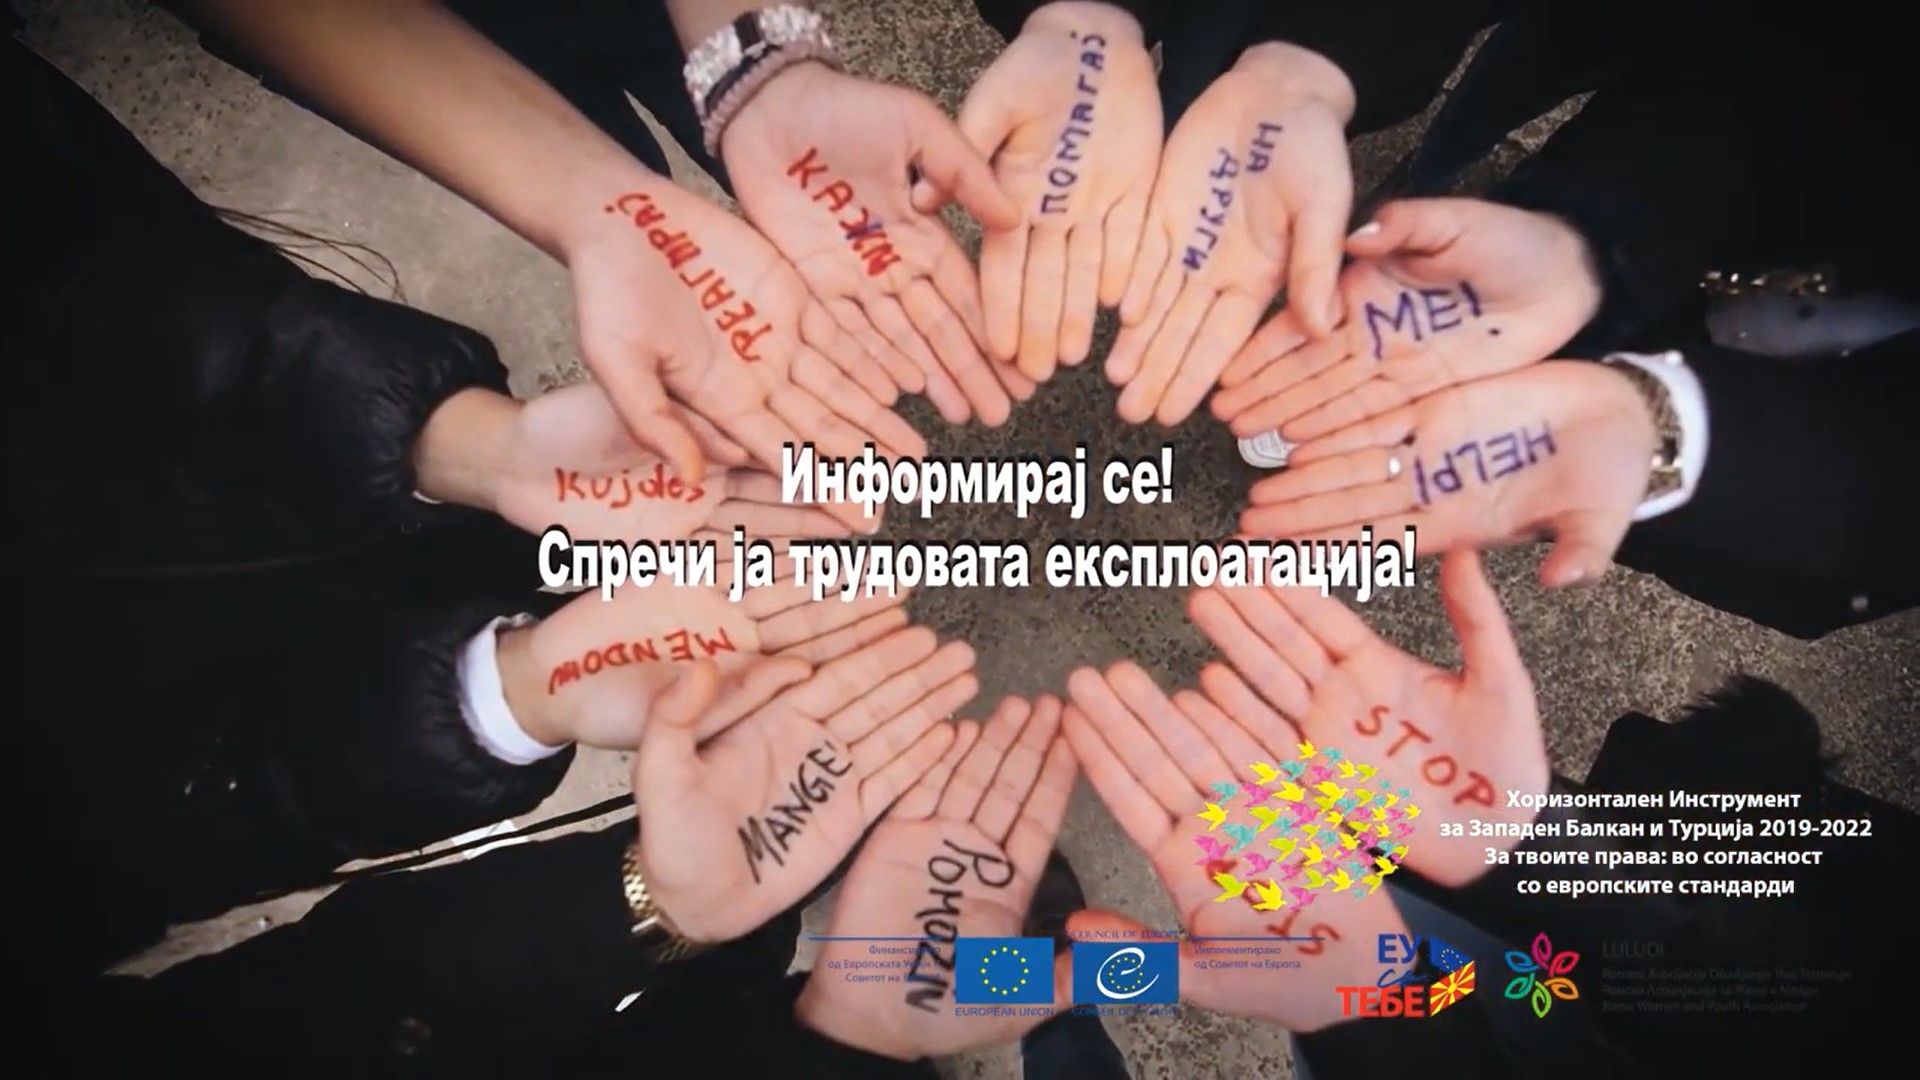 Youth in North Macedonia raising awareness on how to prevent trafficking in children and girls